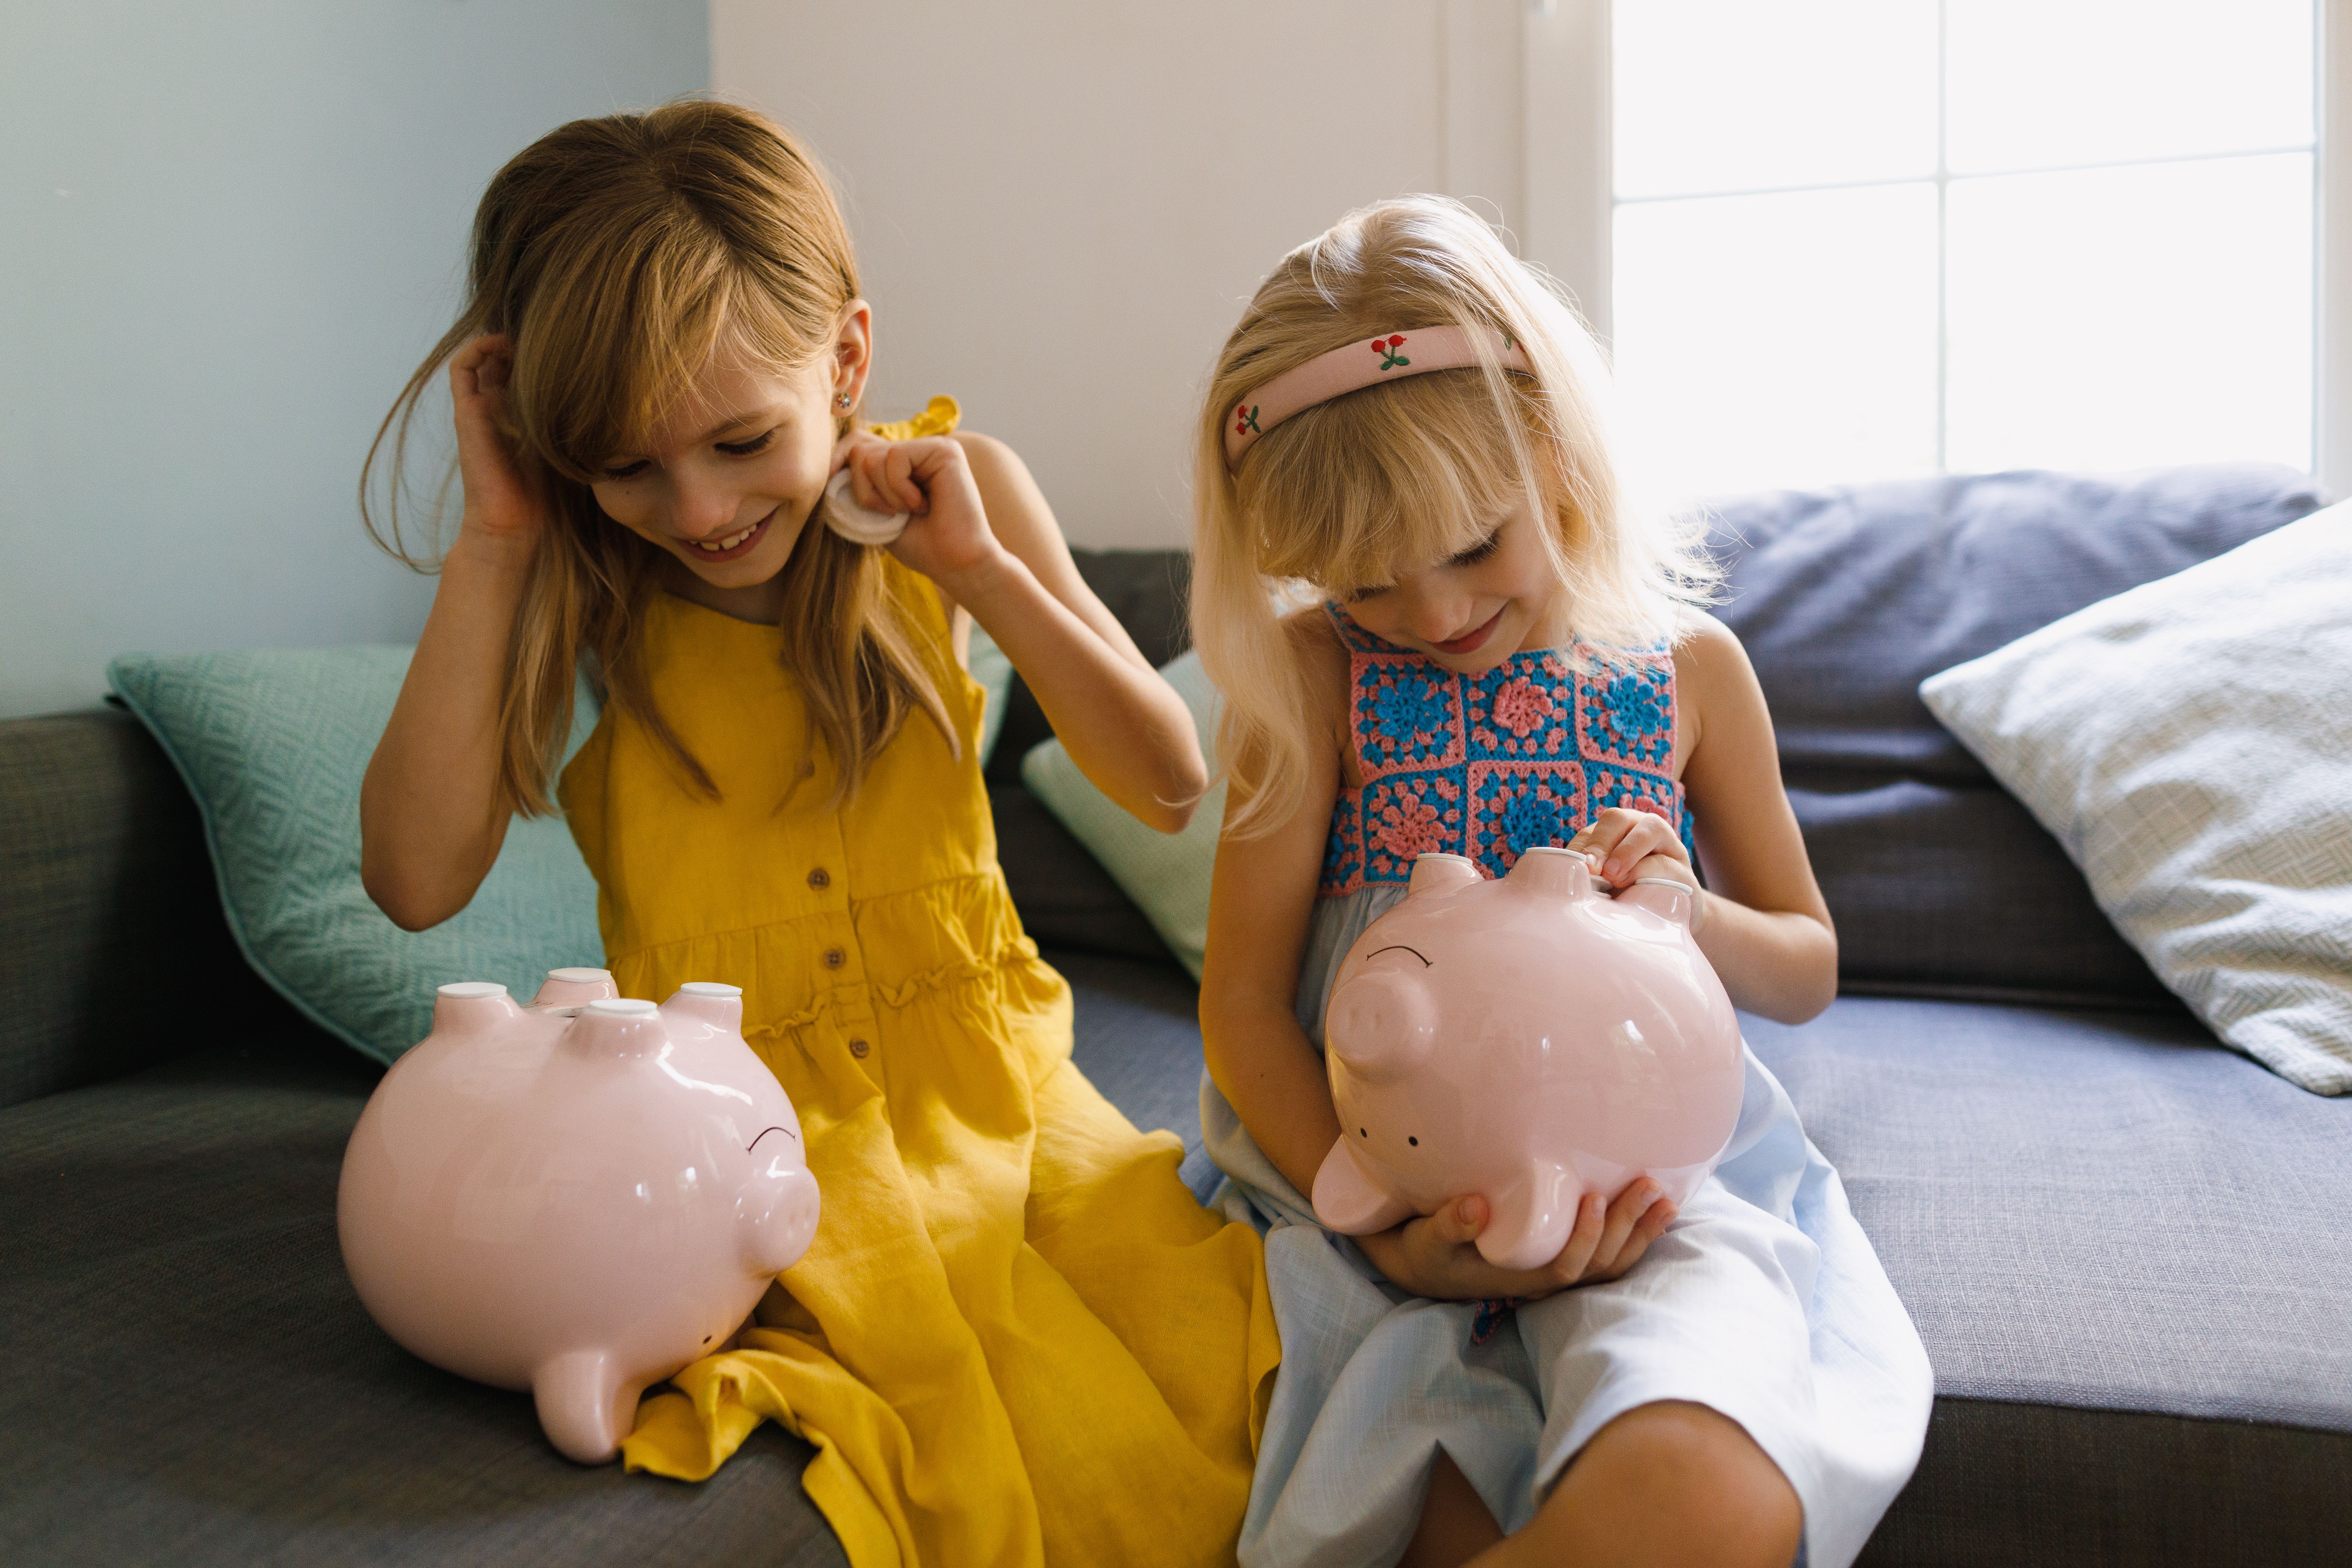 Two young girls putting money into their pink piggy banks